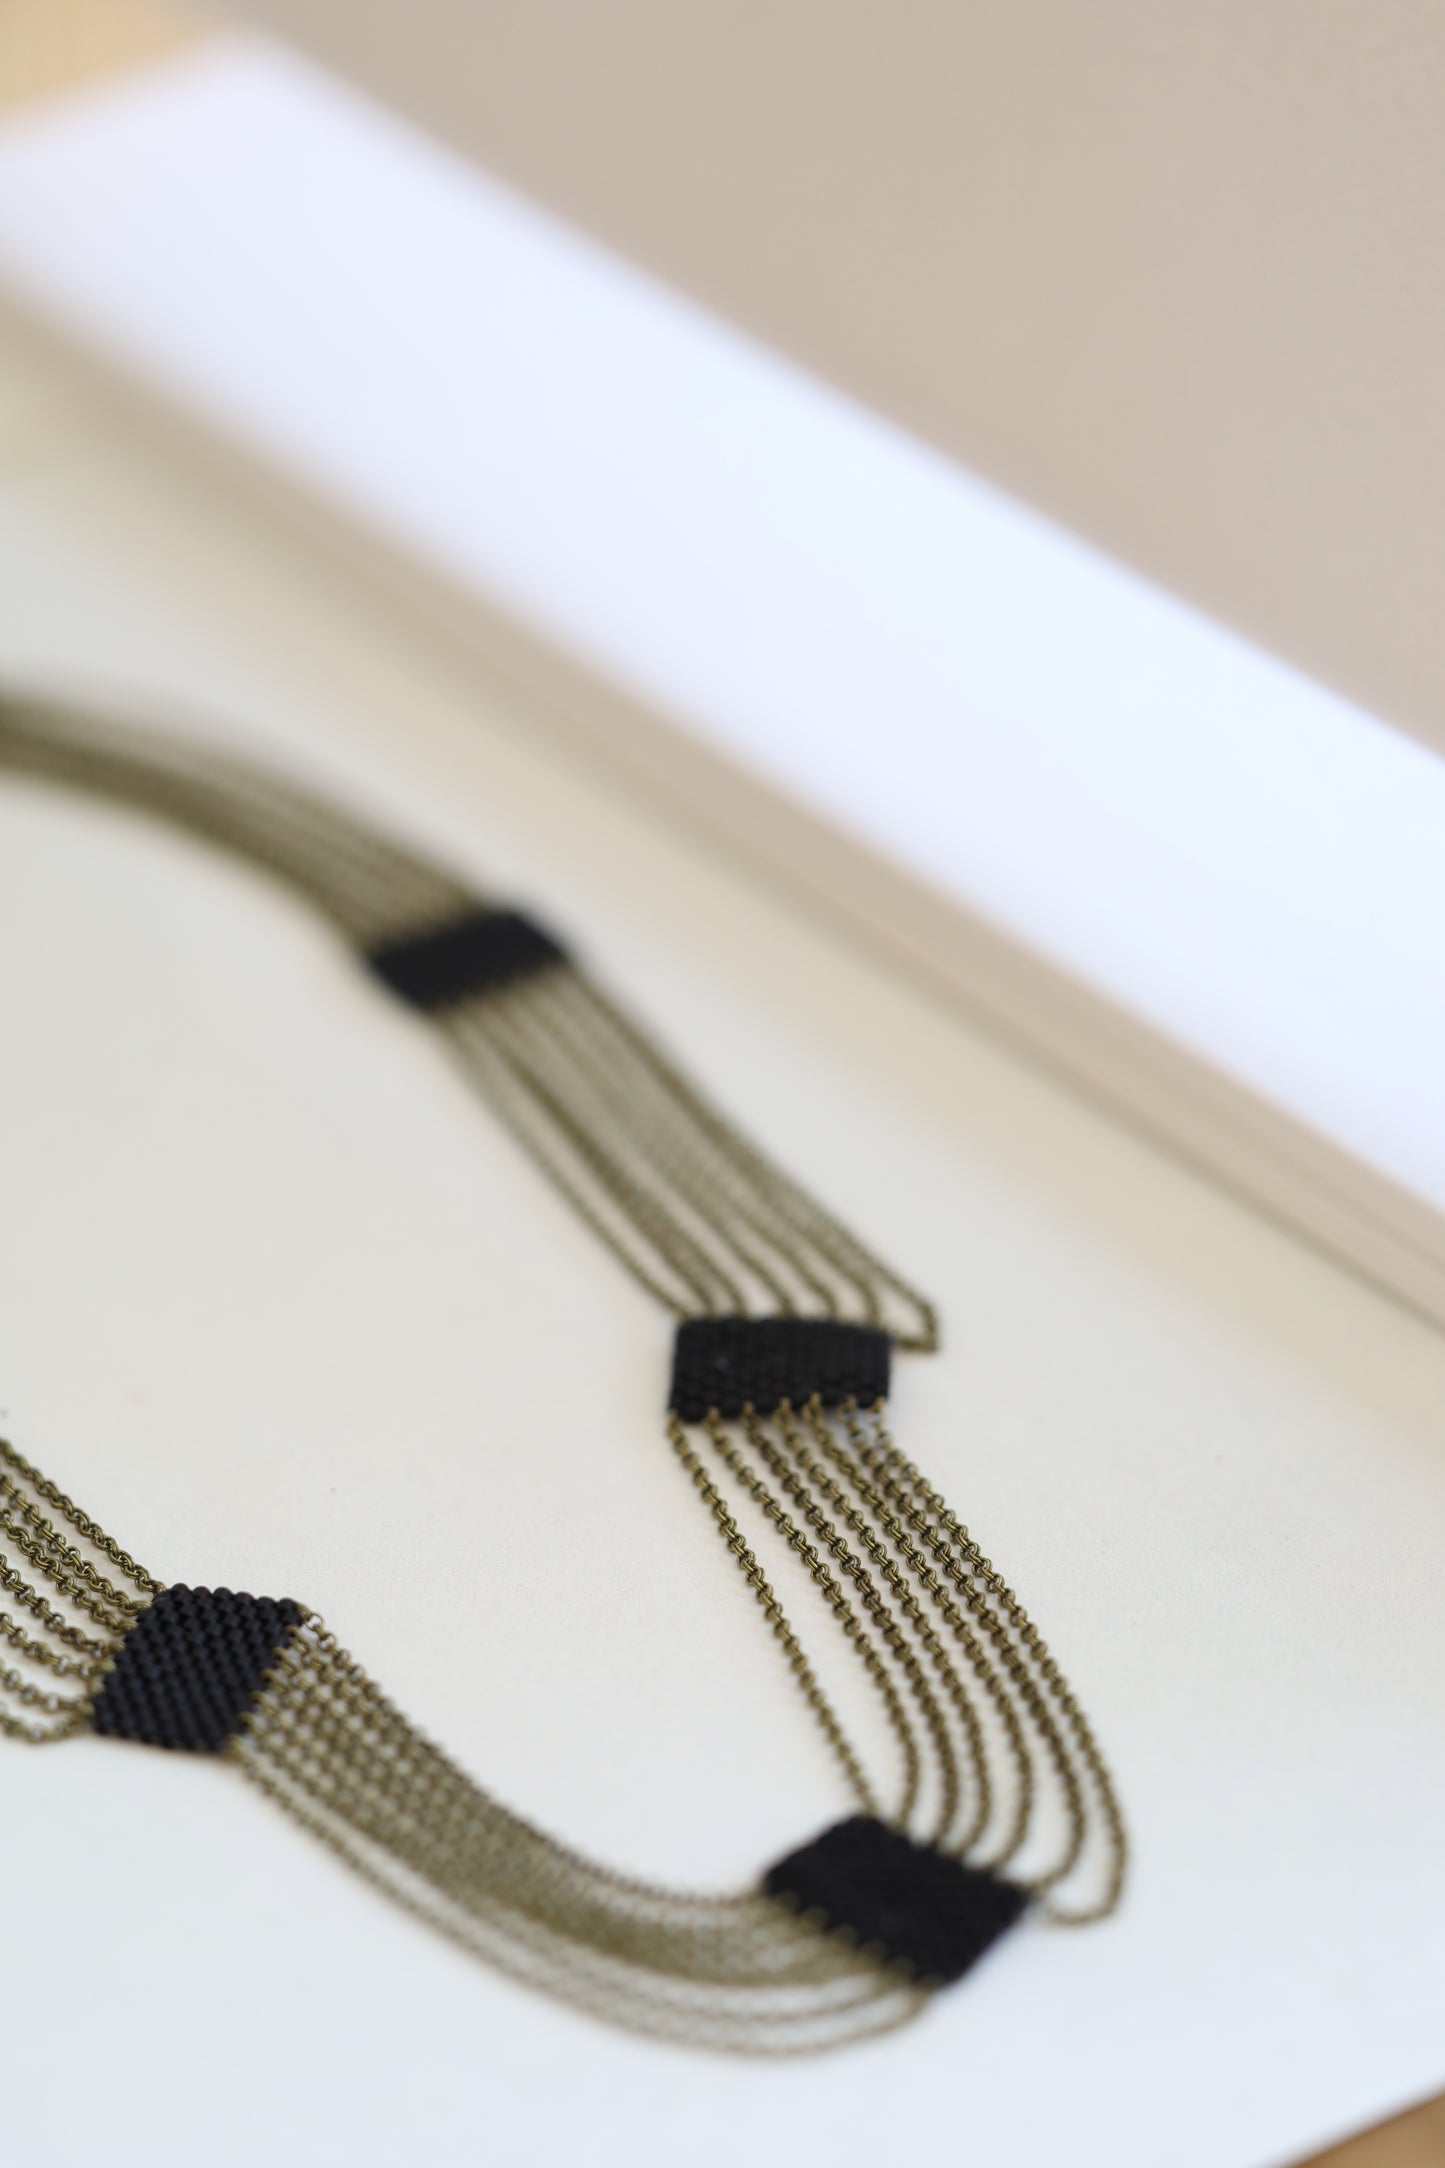 Elegant draping necklace made of chain and black beads laying on white background..